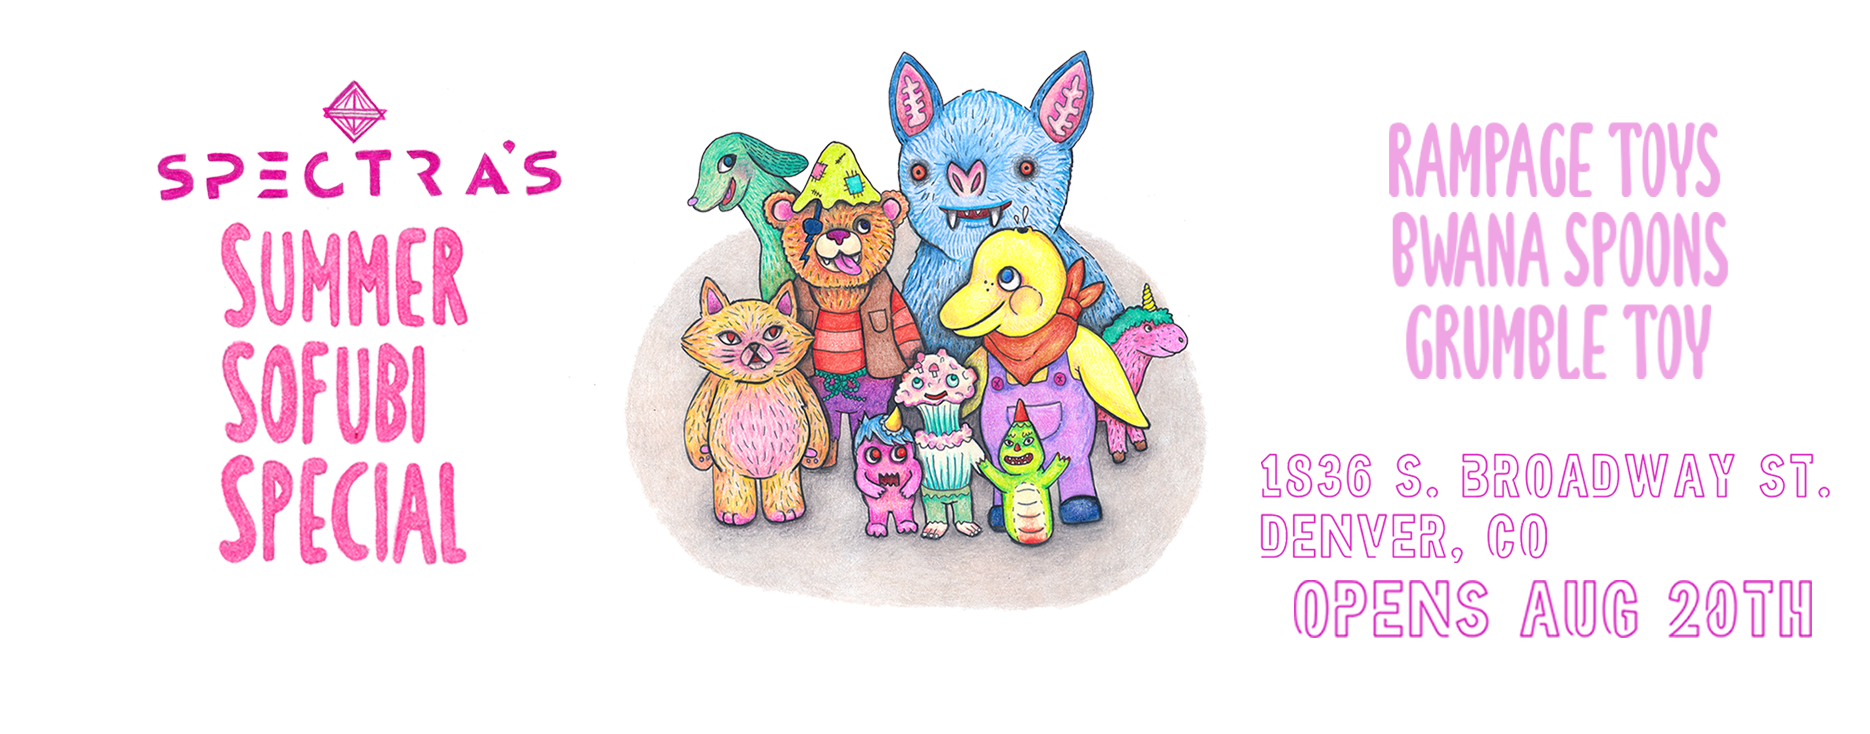 Spectra’s Summer Sofubi Special